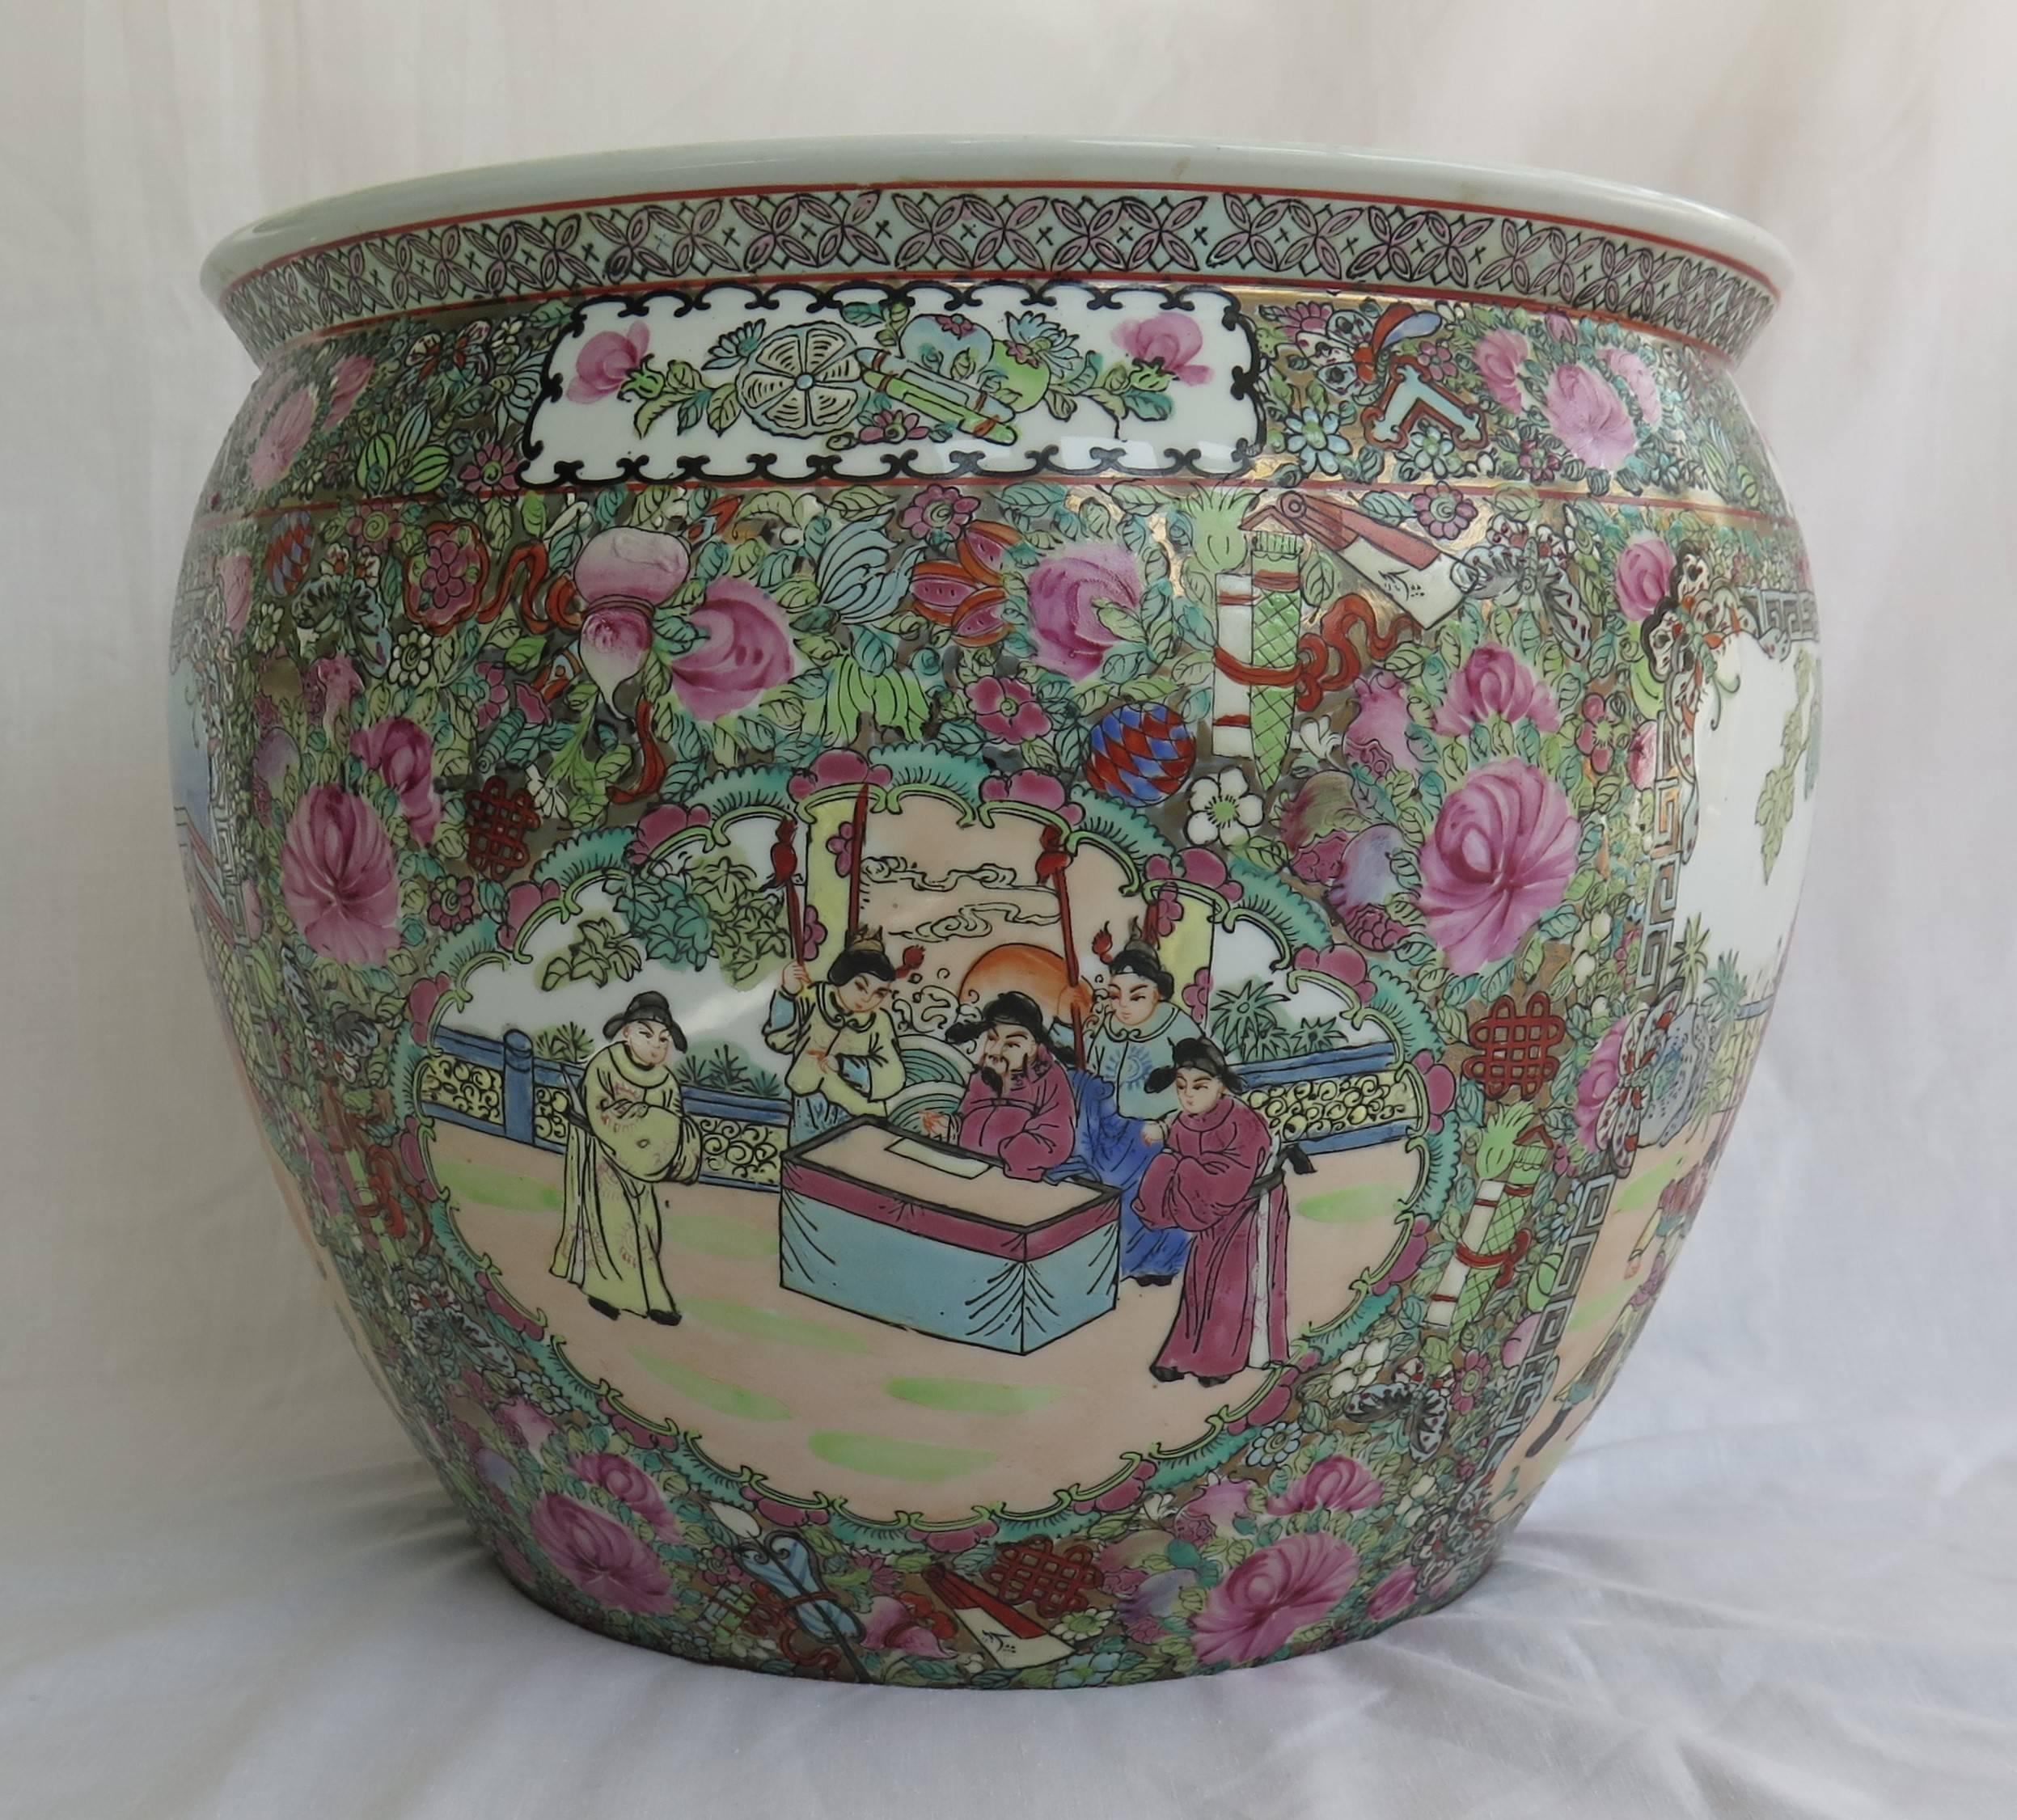 Chinese Export Large CHINESE Porcelain Fish Bowl or JARDINIE ̀RE, Famille Rose Mandarin, 20th C